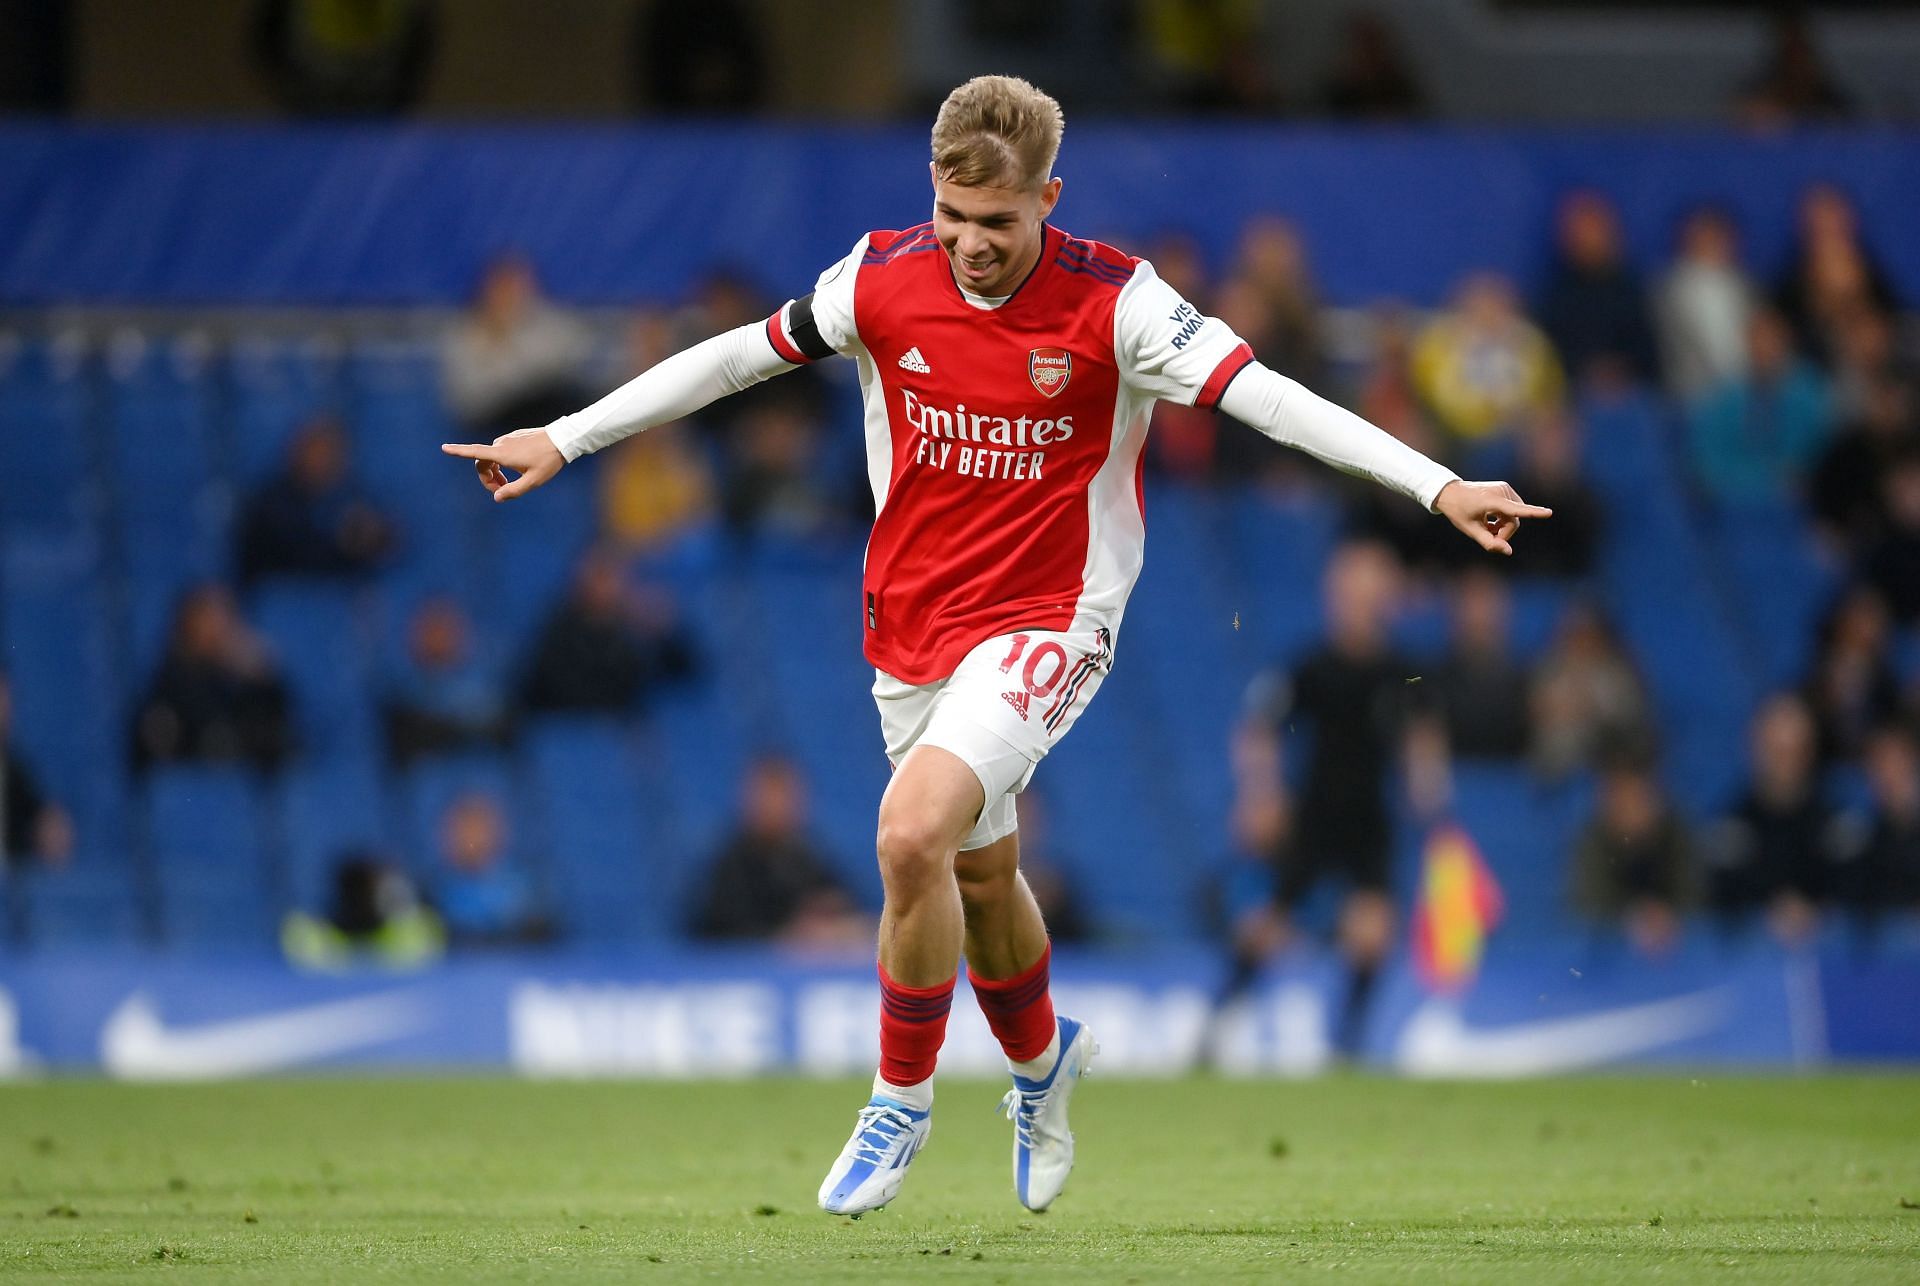 It remains to be seen what plans Mikel Arteta has for Smith Rowe this term.